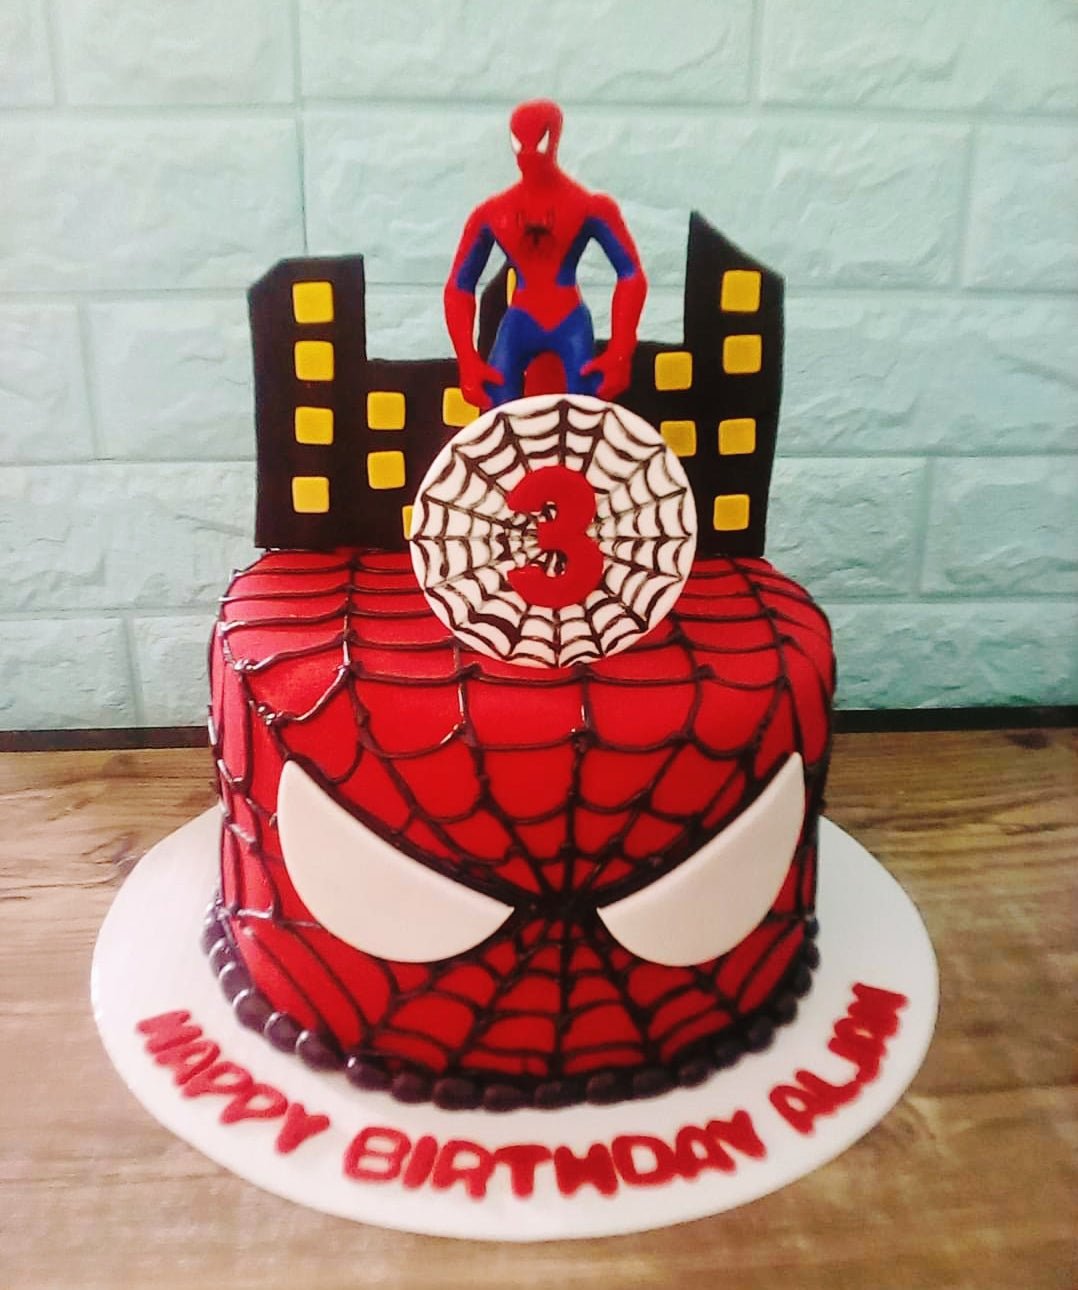 2-Tiered Spiderman Themed Party Cakes | Express Home Delivery